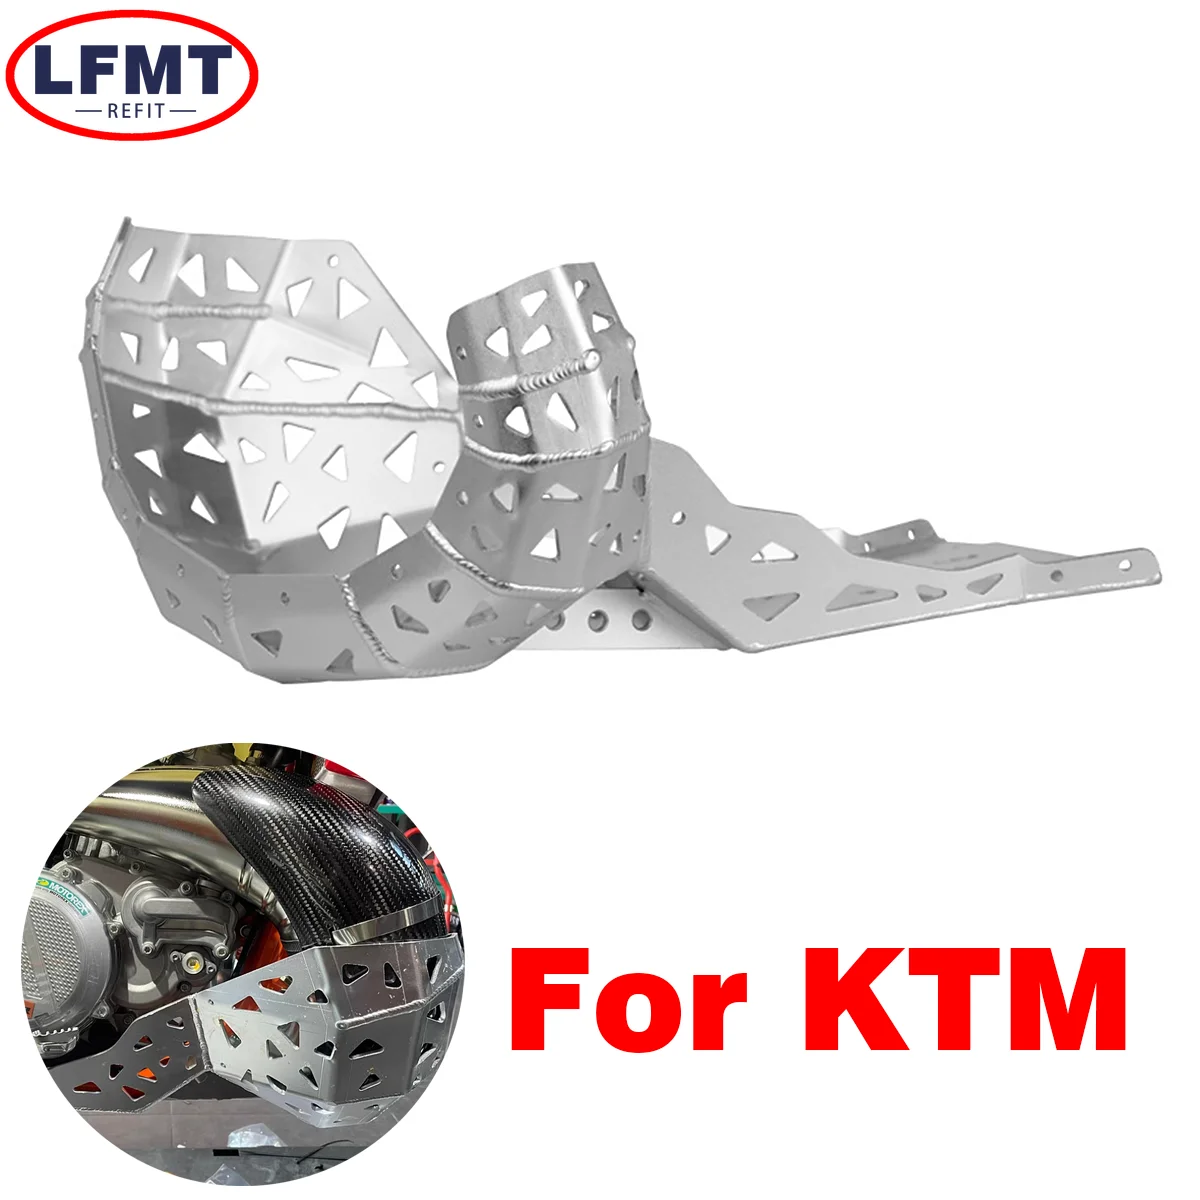 

2024 Motorcycle Aluminum alloy Engine Protection Cover Frame Protector Chassis Guard Skid Plate For KTM EXC250 EXC300 2020-2023